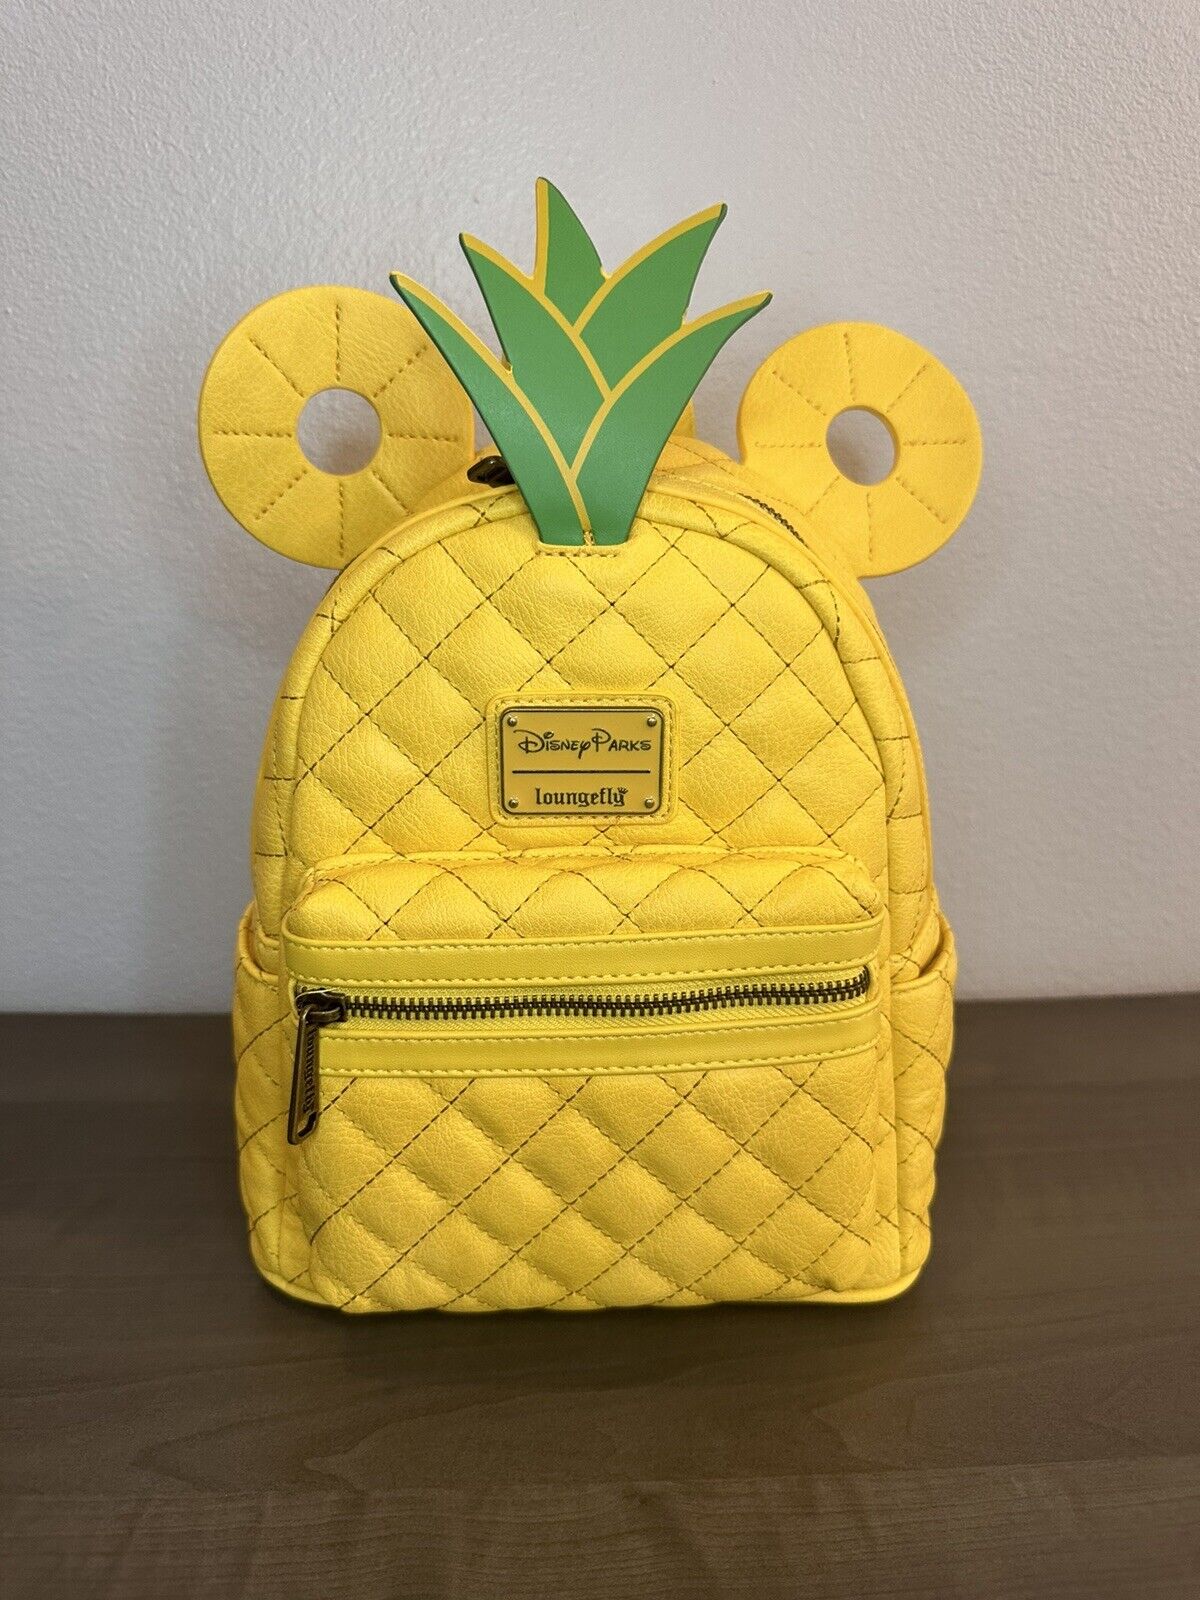 BRAND NEW Disney Parks Mickey Mouse Pineapple Loungfly Mini Backpack RARE